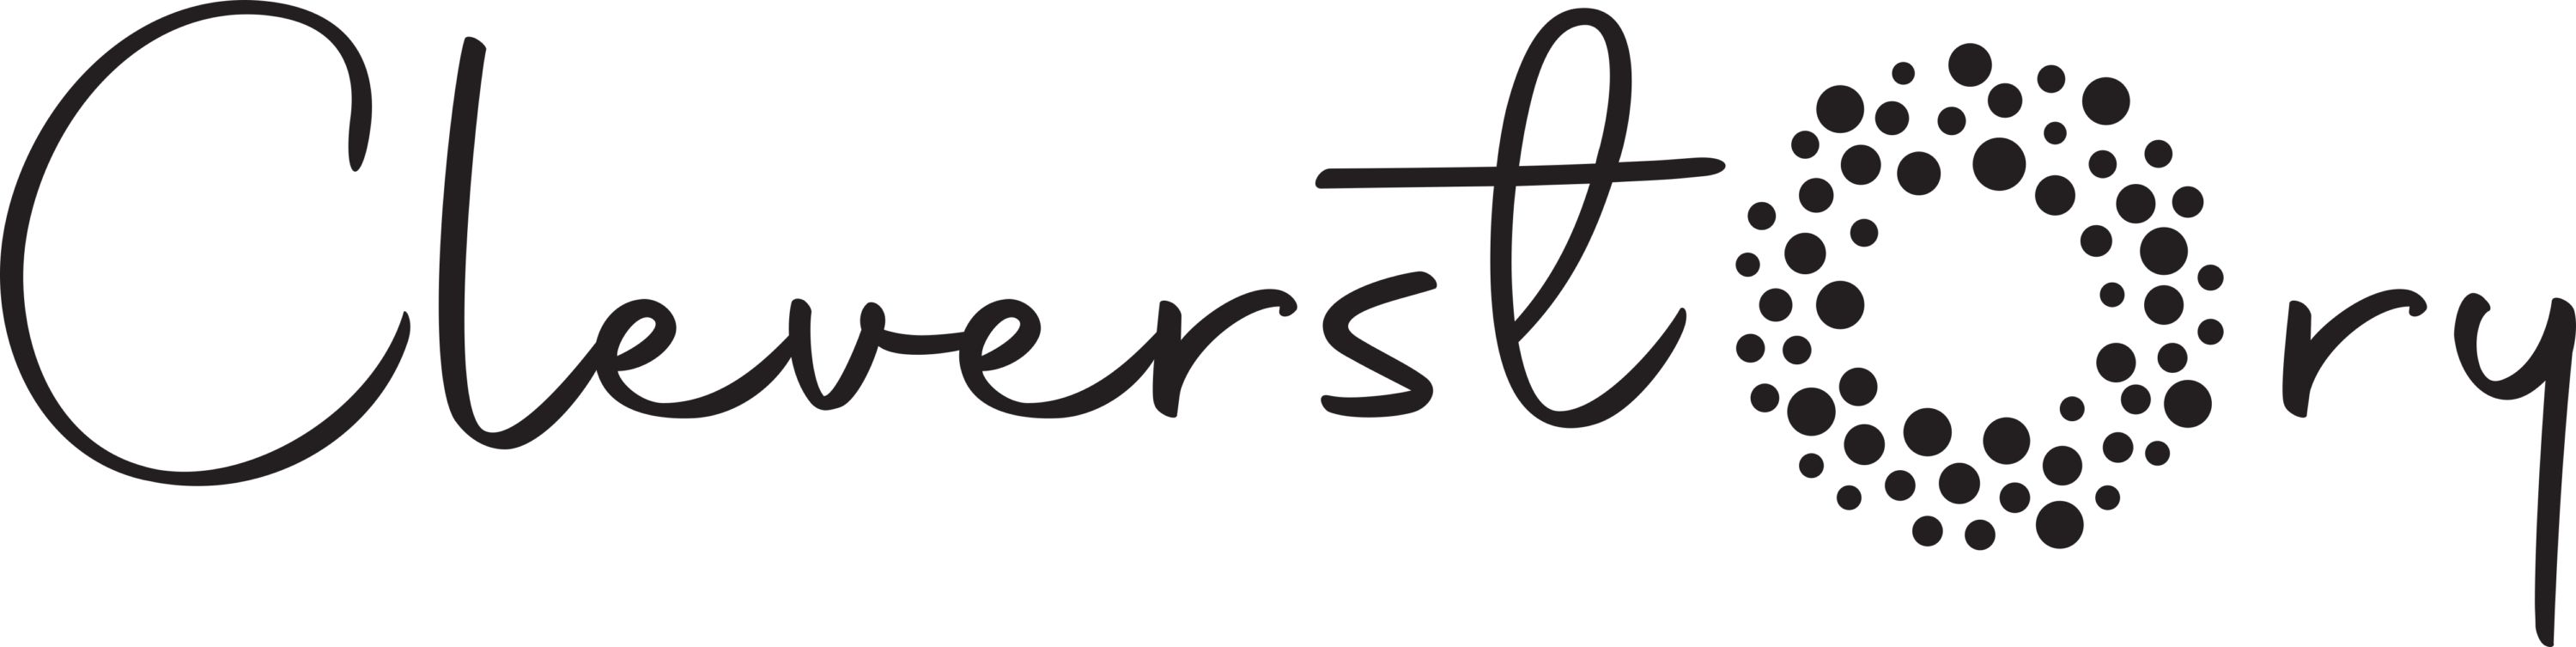 Cleverstory Logo